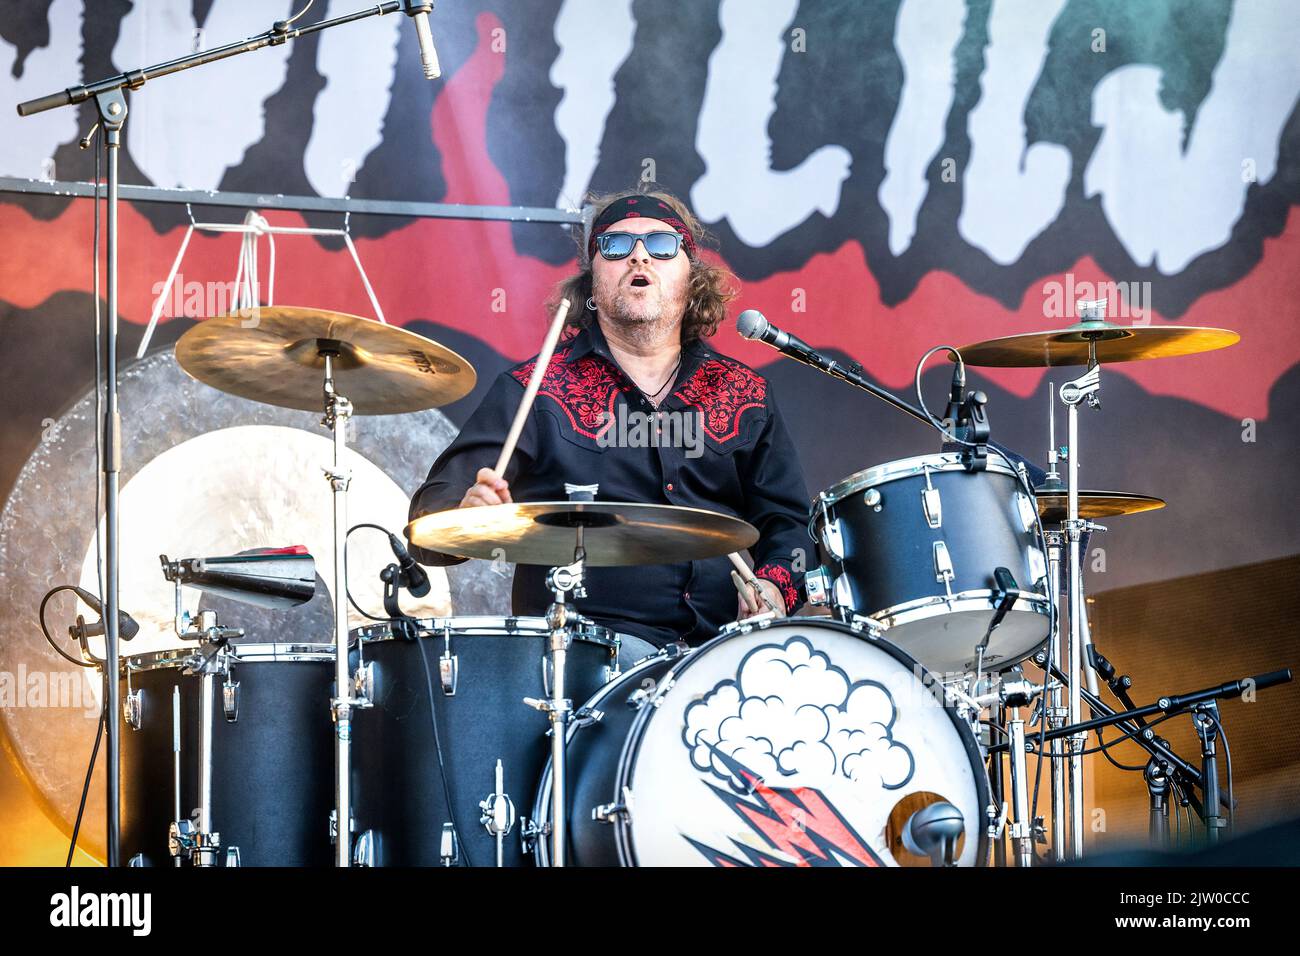 Solvesborg, Sweden. 10th, June 2022. The Swedish hard rock band The Hellacopters performs a live concert during the Swedish music festival Sweden Rock Festival 2022 in Solvesborg. Here drummer Robert Eriksson is seen live on stage. (Photo credit: Gonzales Photo - Terje Dokken). Stock Photo